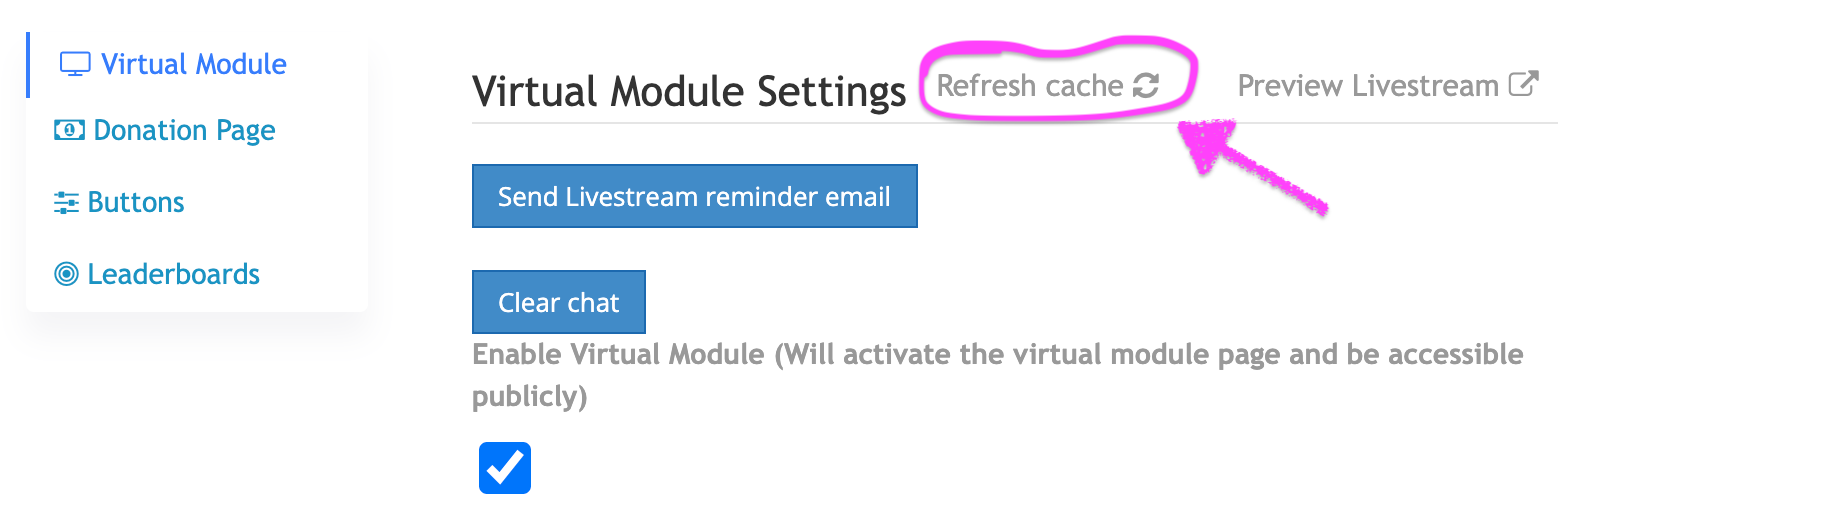 Refresh_cache.png